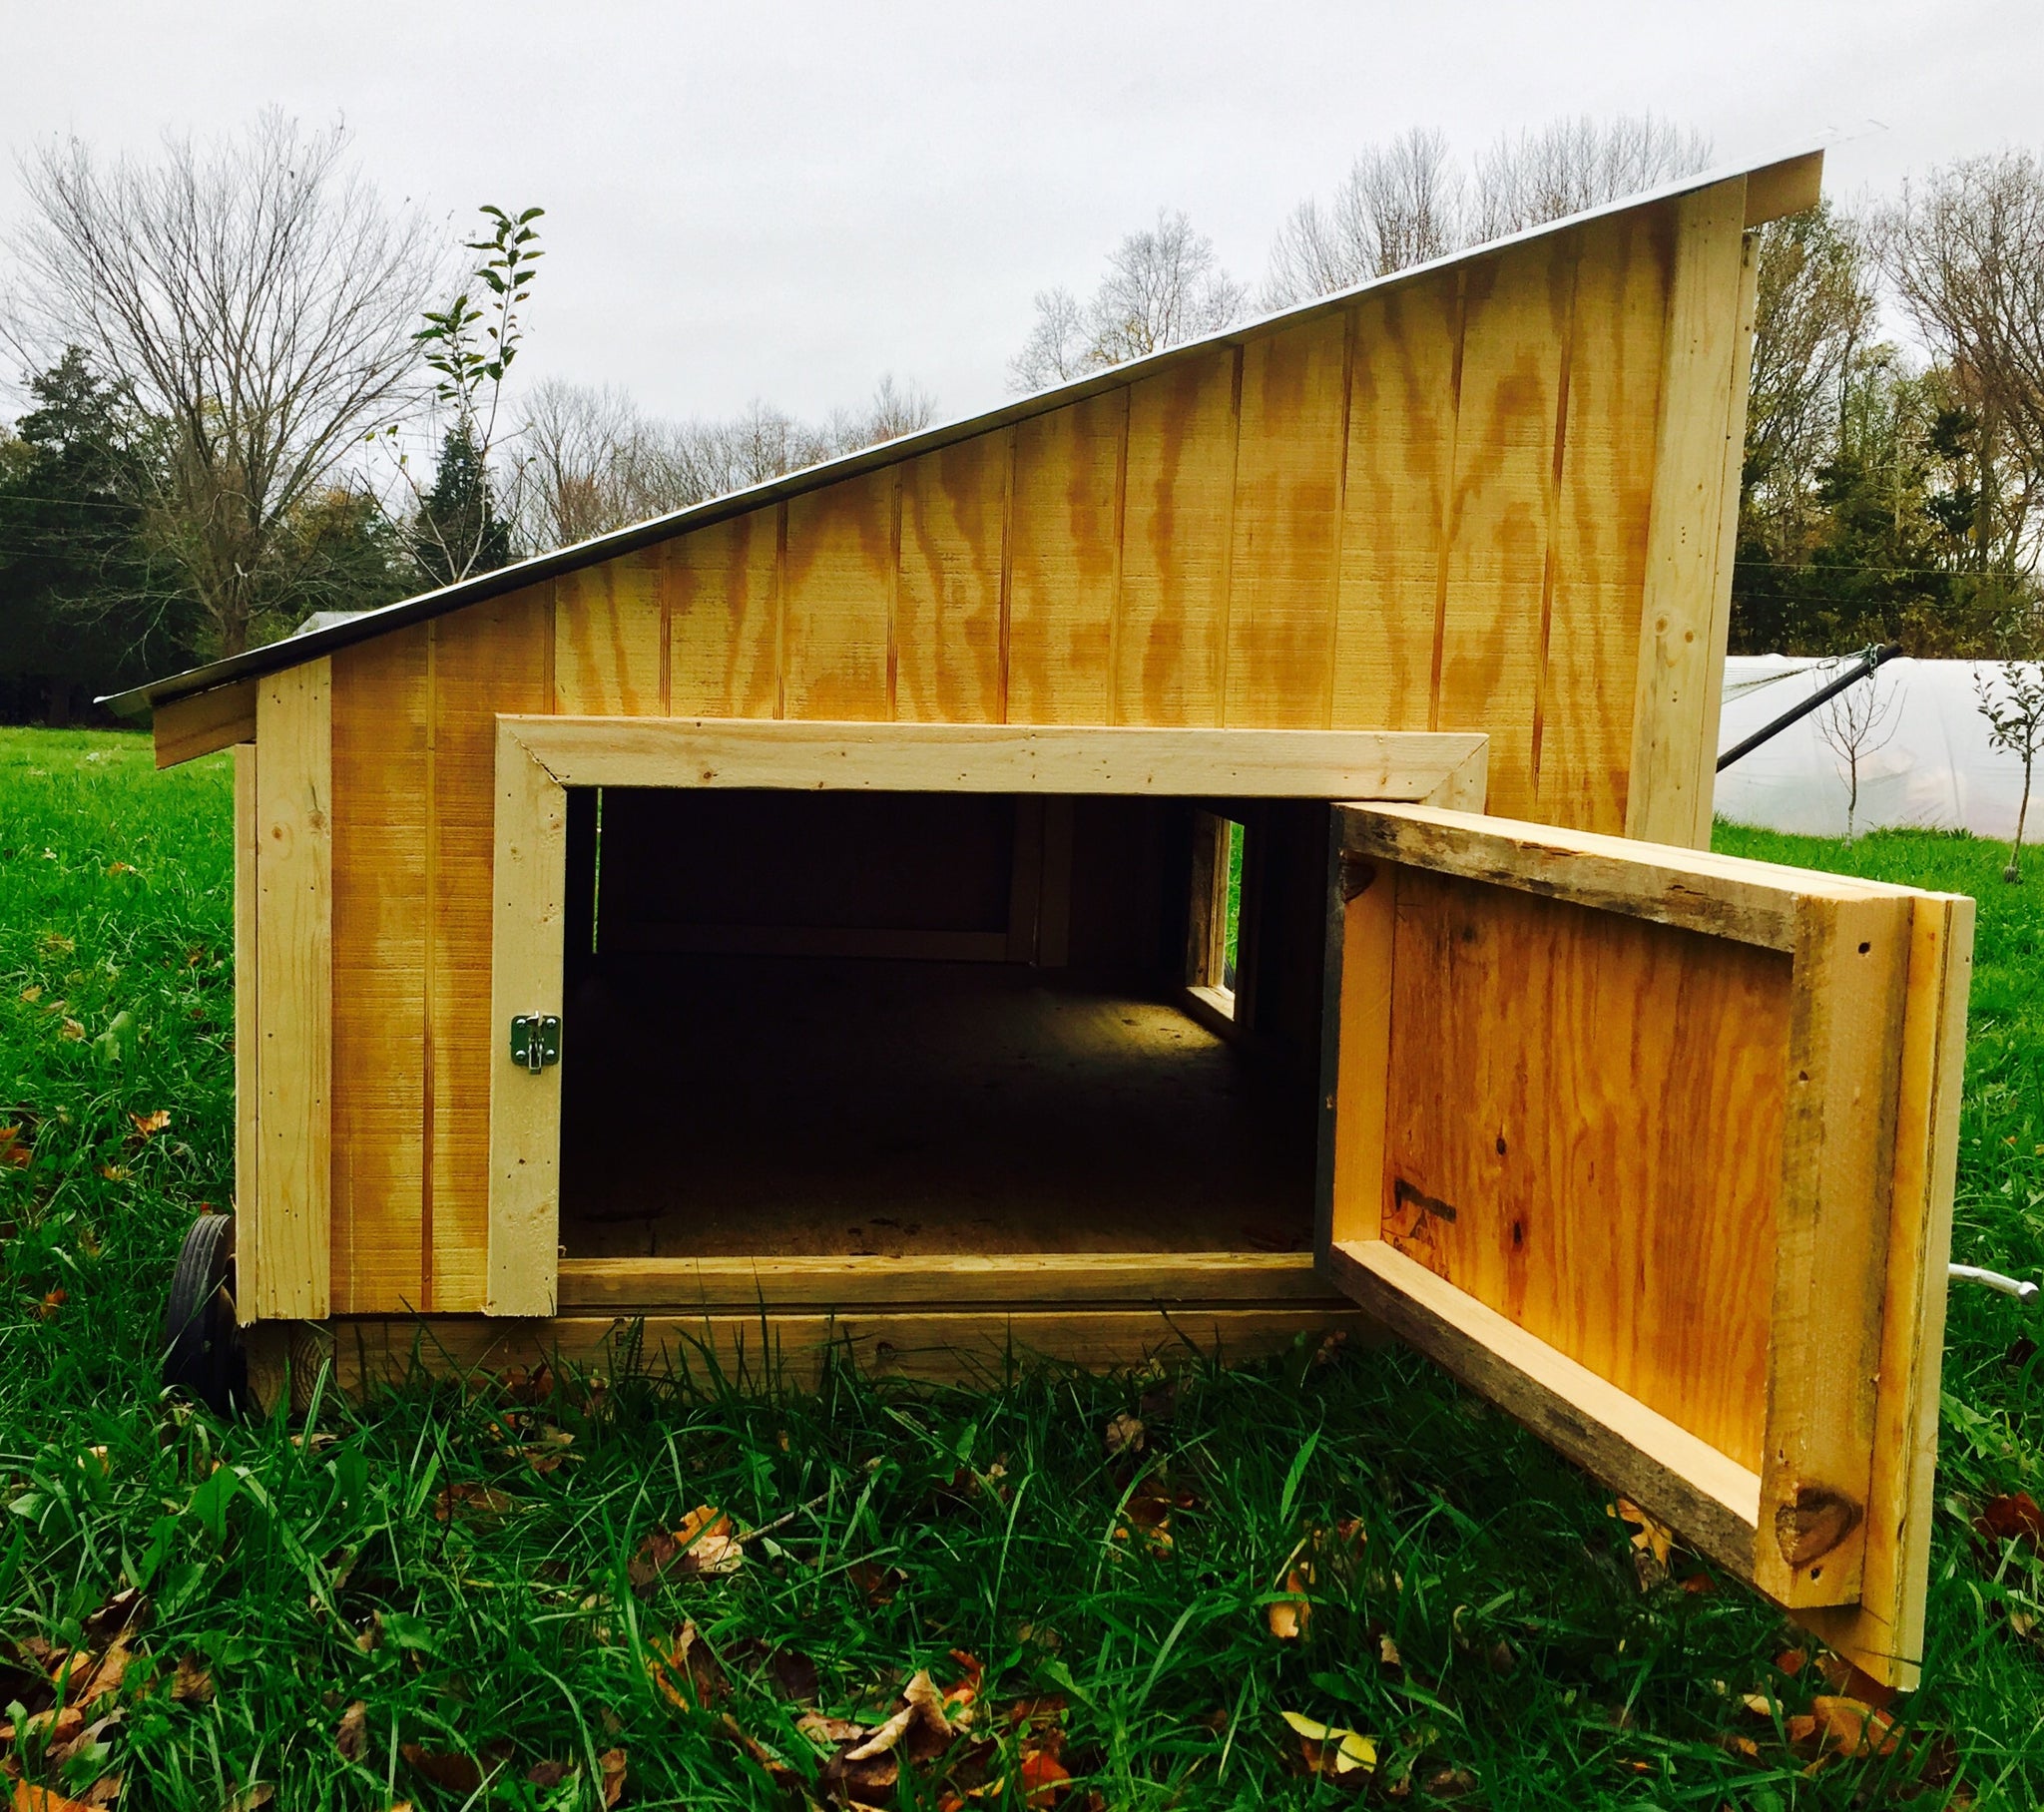 Waterfowl Coop (for Ducks and Geese)